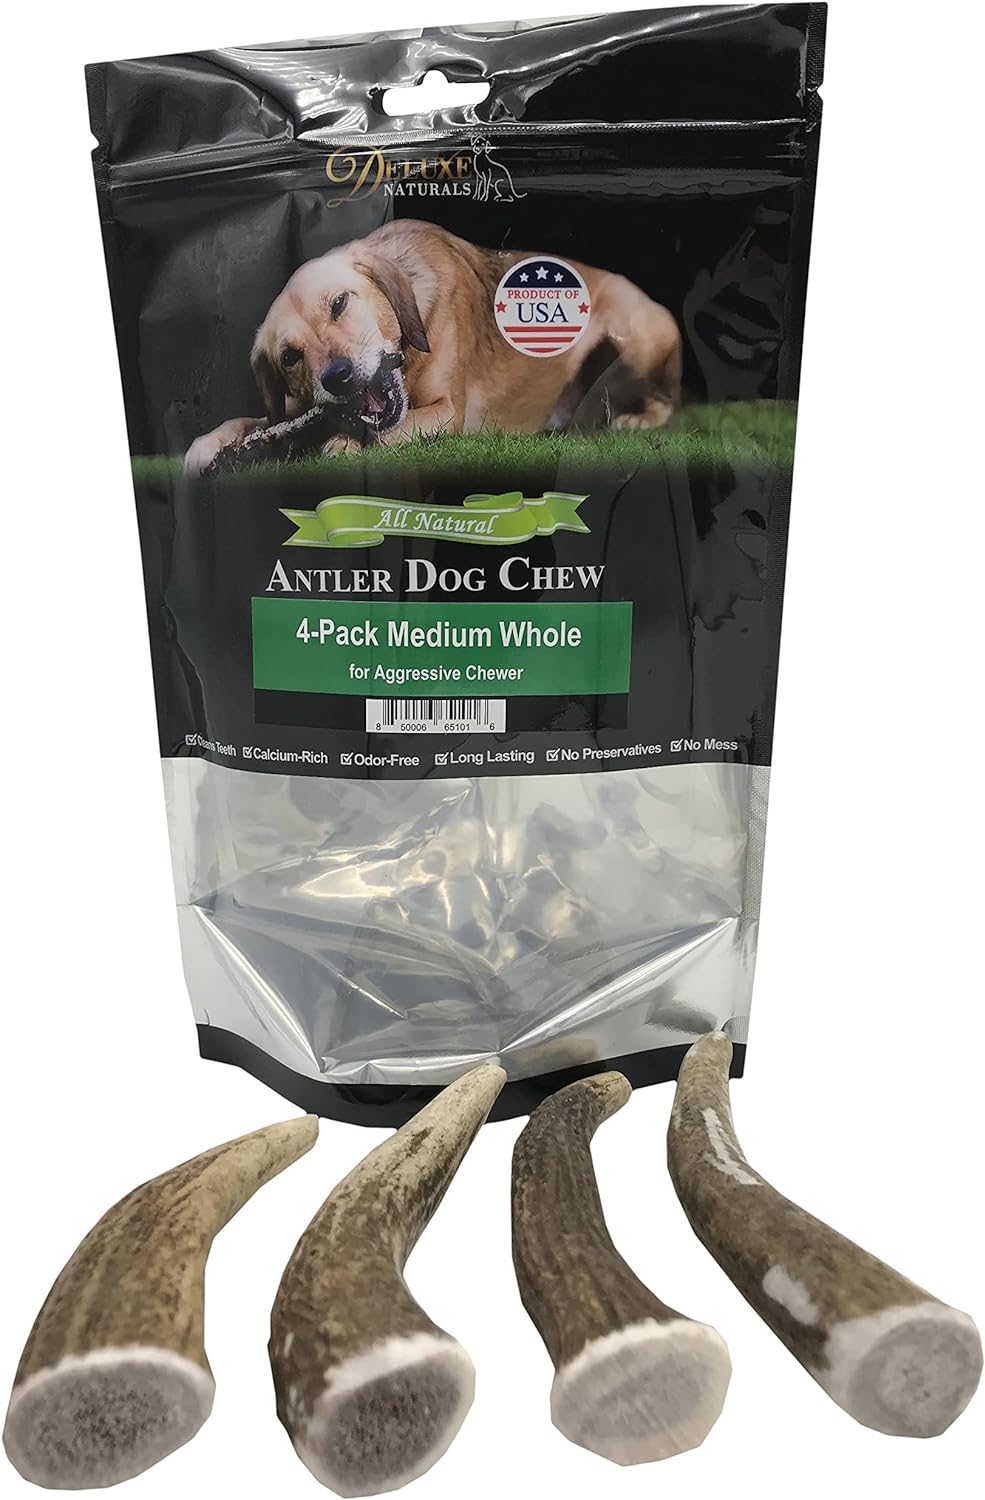 Elk Antler Chews for Dogs | Naturally Shed USA Collected Elk Antlers | All Natural A-Grade Premium Elk Antler Dog Chews | Product of USA, 4-Pack Medium Whole